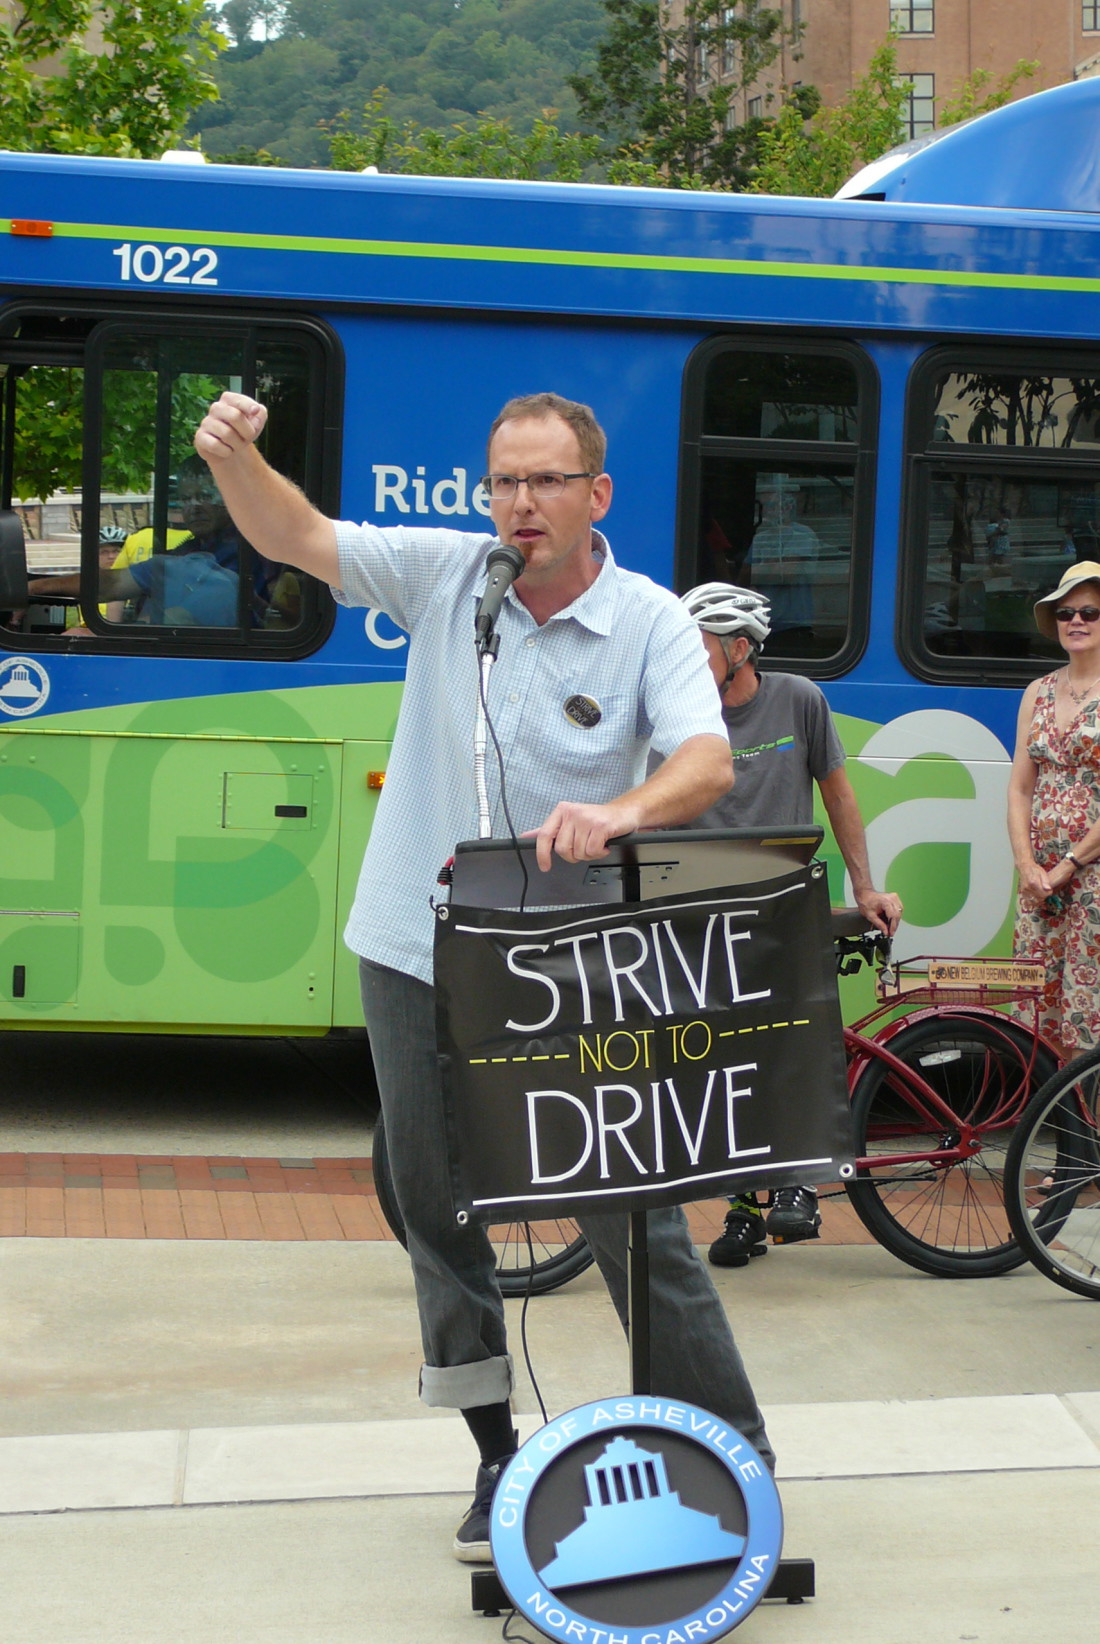 GET A MOVE ON: Each spring, Asheville on Bikes executive director Mike Sule and other advocates help organize a Strive Not to Drive campaign to encourage multimodal  and active transit. Photo by Jake Frankel